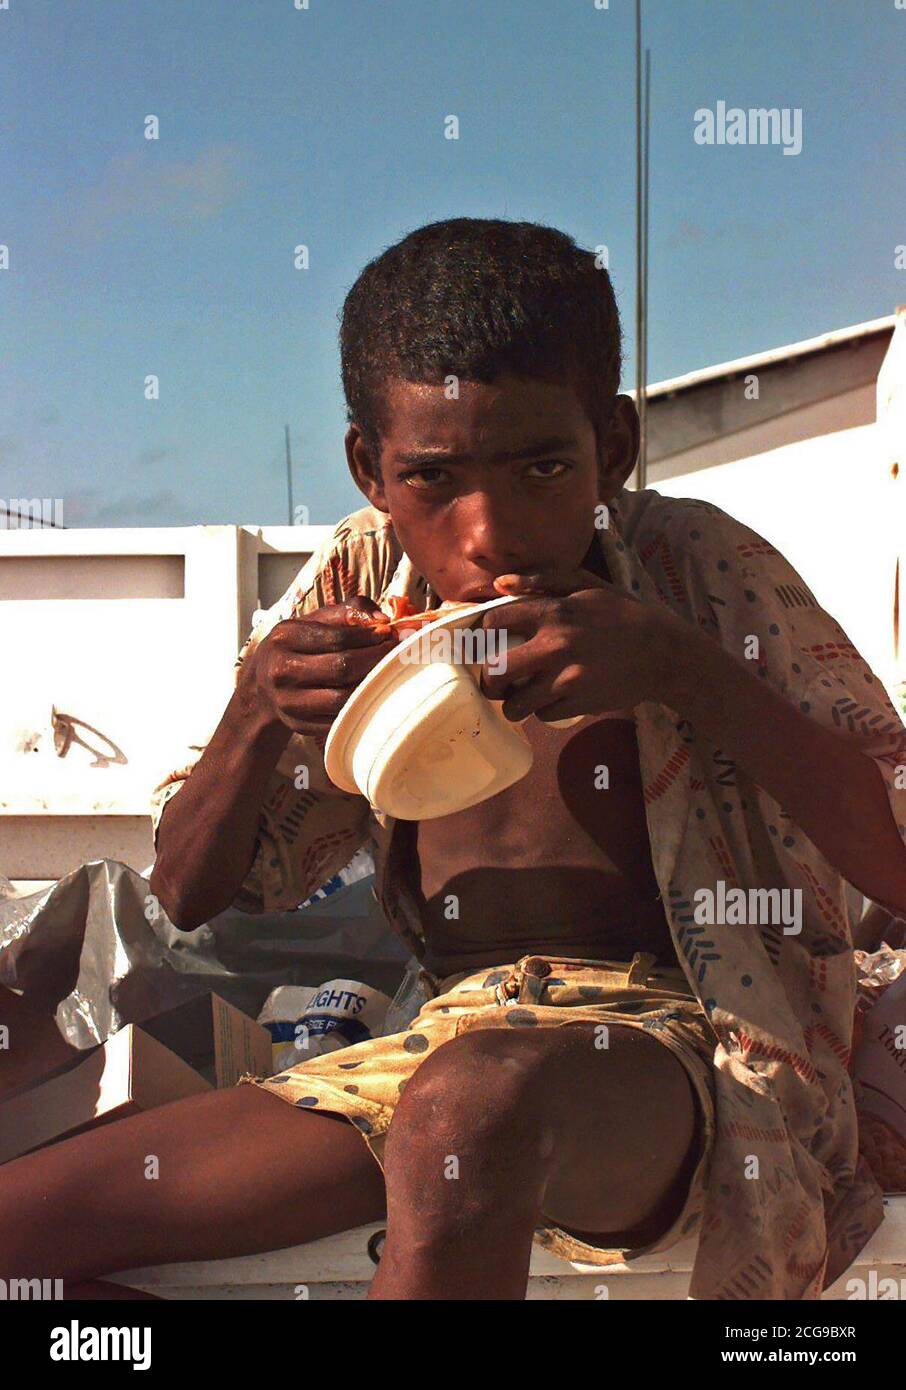 1992 - A young Somali finds discarded food in the trash at the Belgian Army compound. Stock Photo